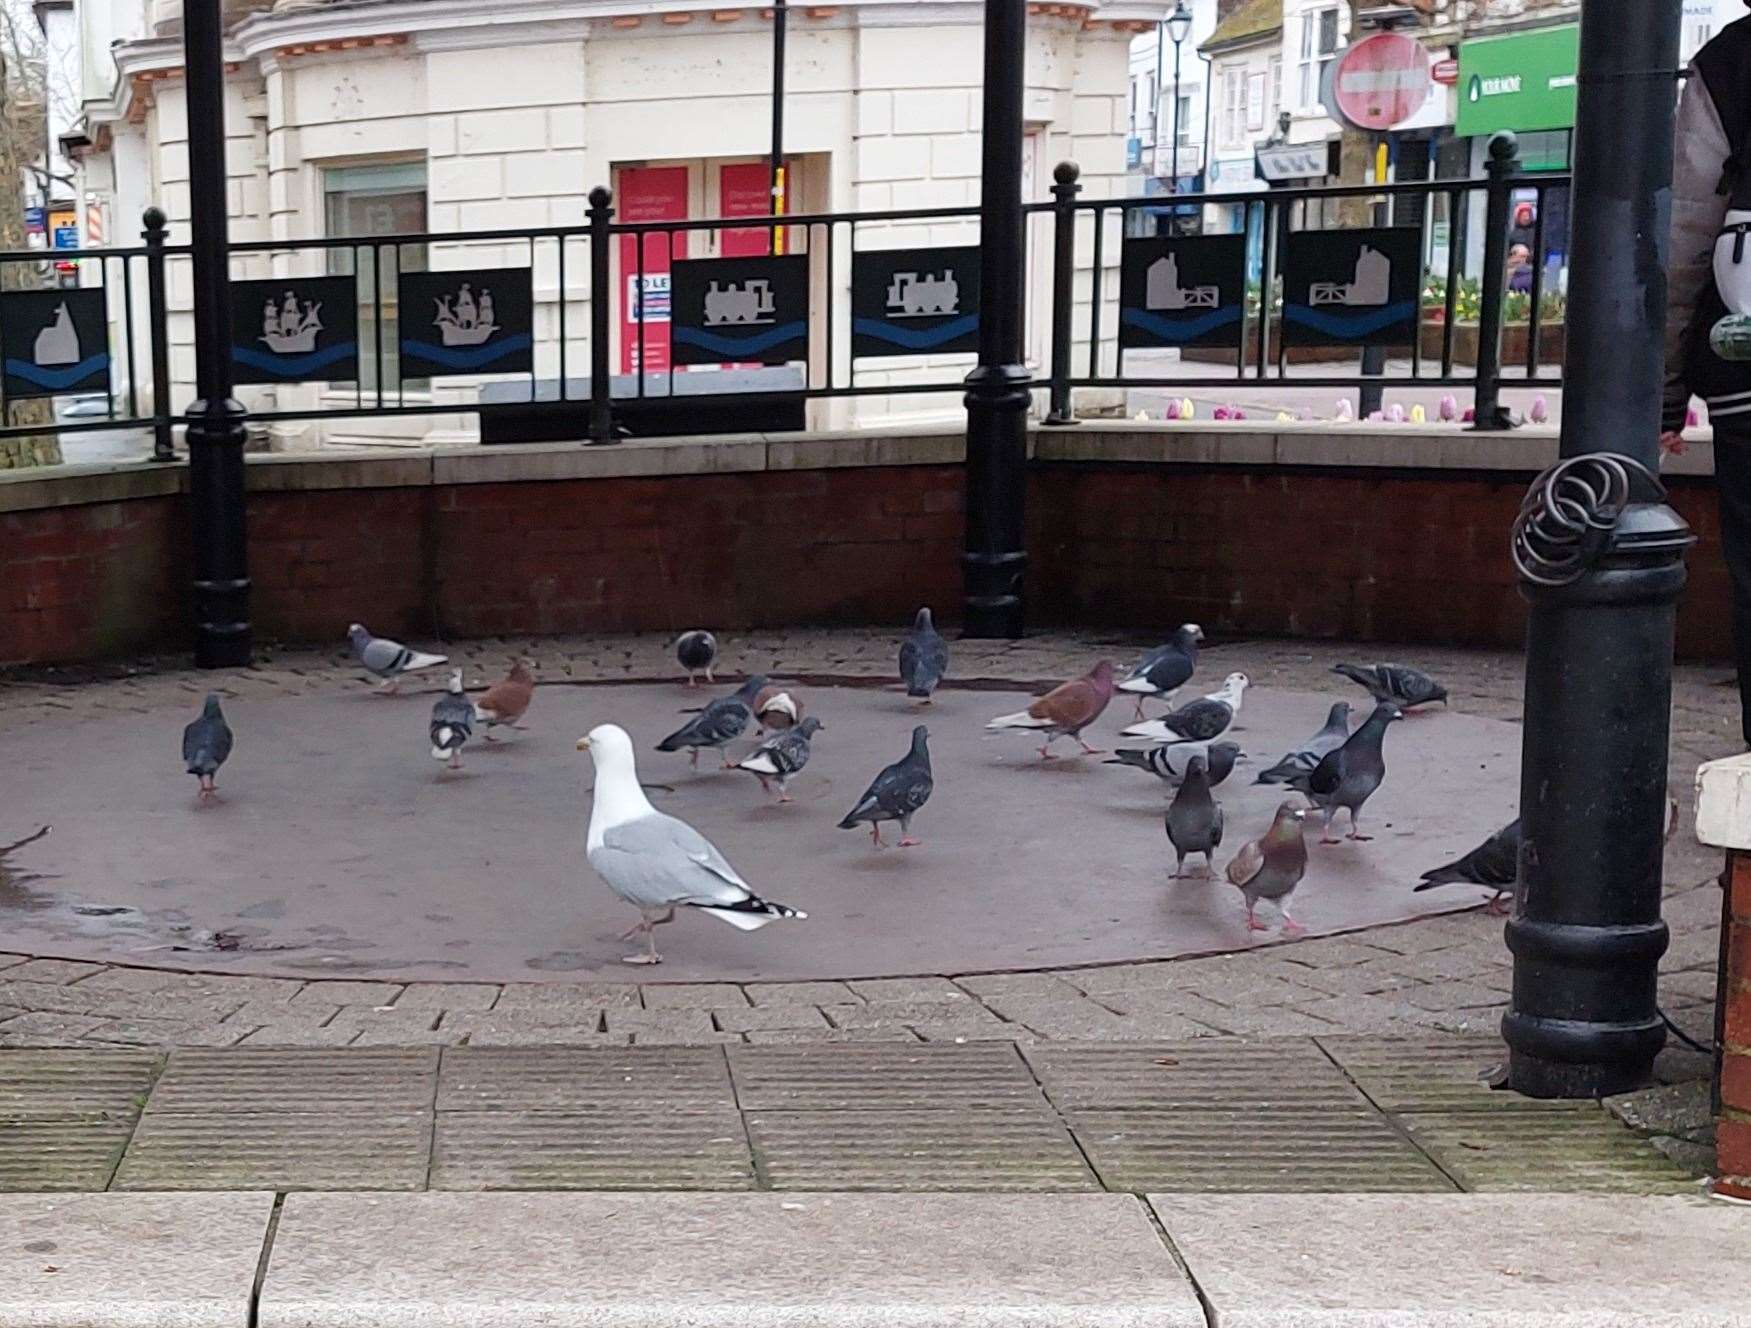 Pigeons and a seagull on the bandstand on Monday afternoon